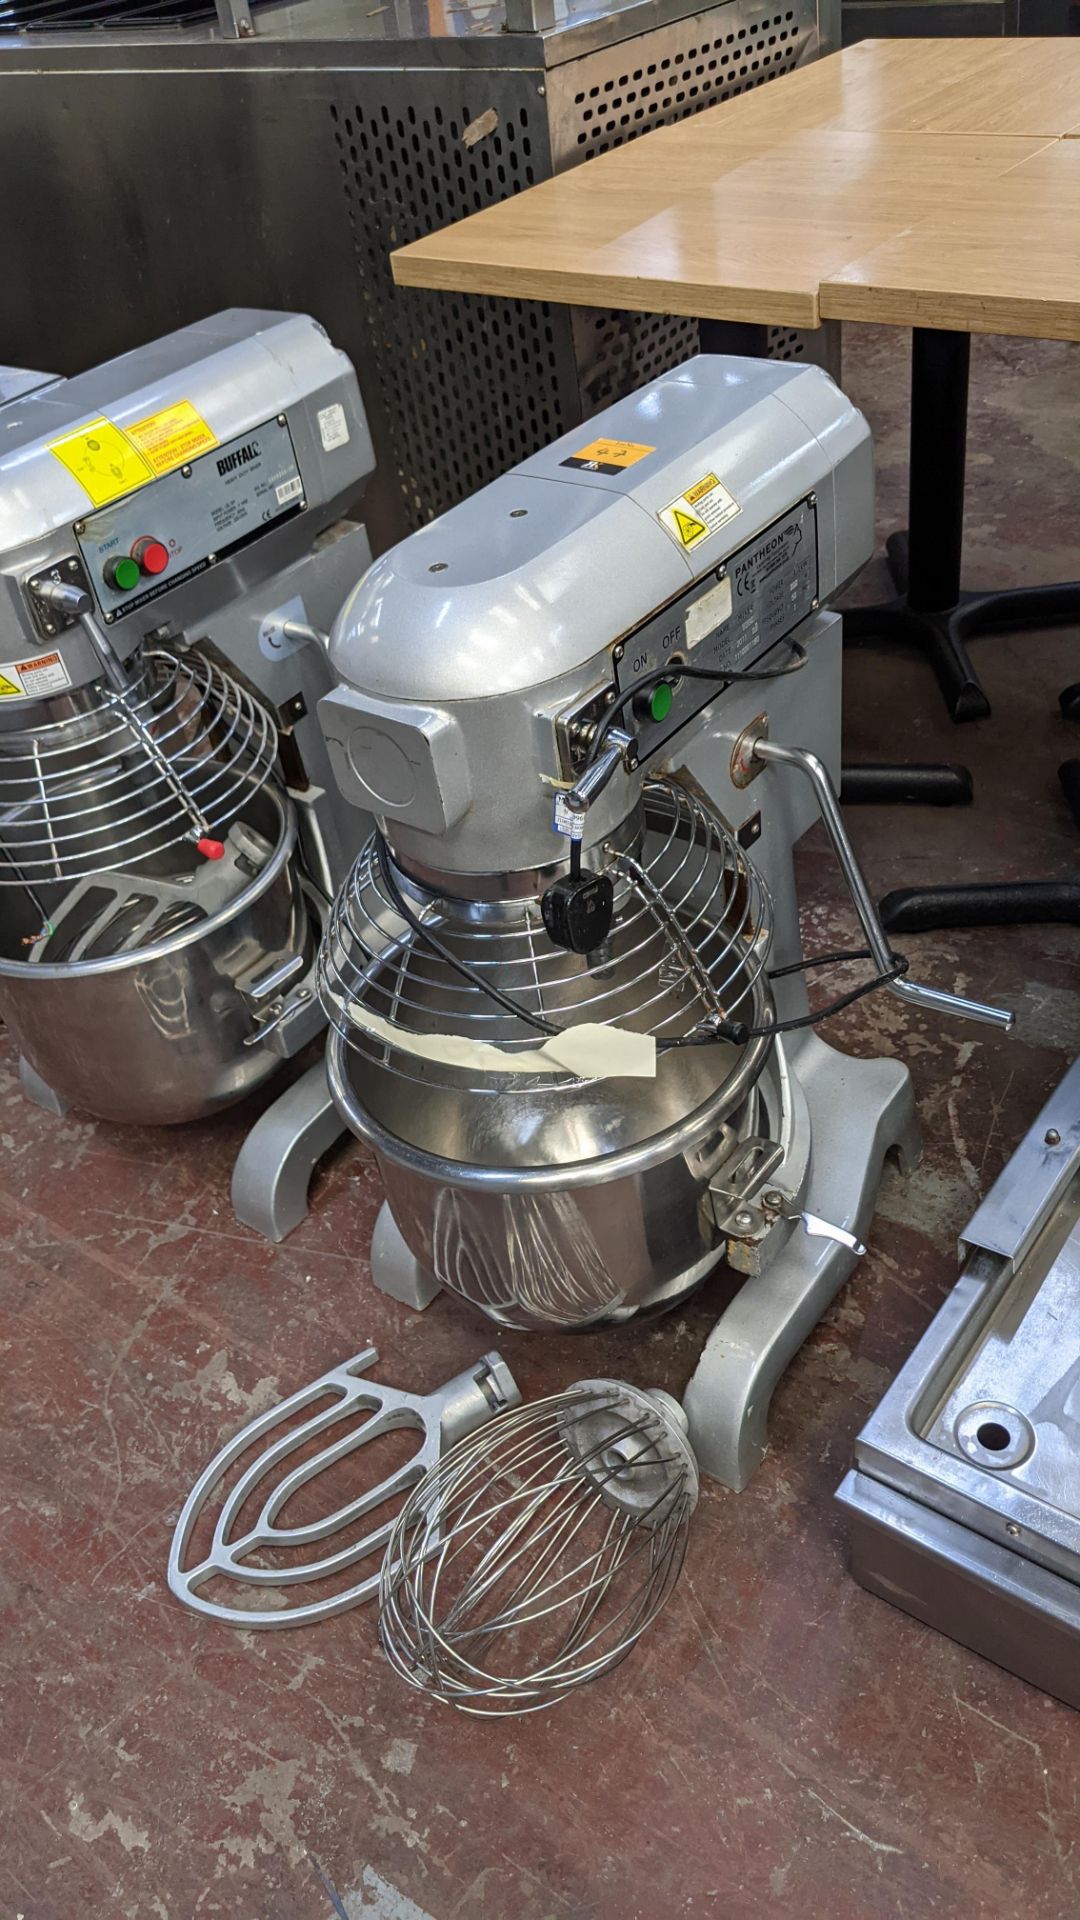 Pantheon model B200 heavy-duty commercial mixer including removable bowl, paddle & whisk